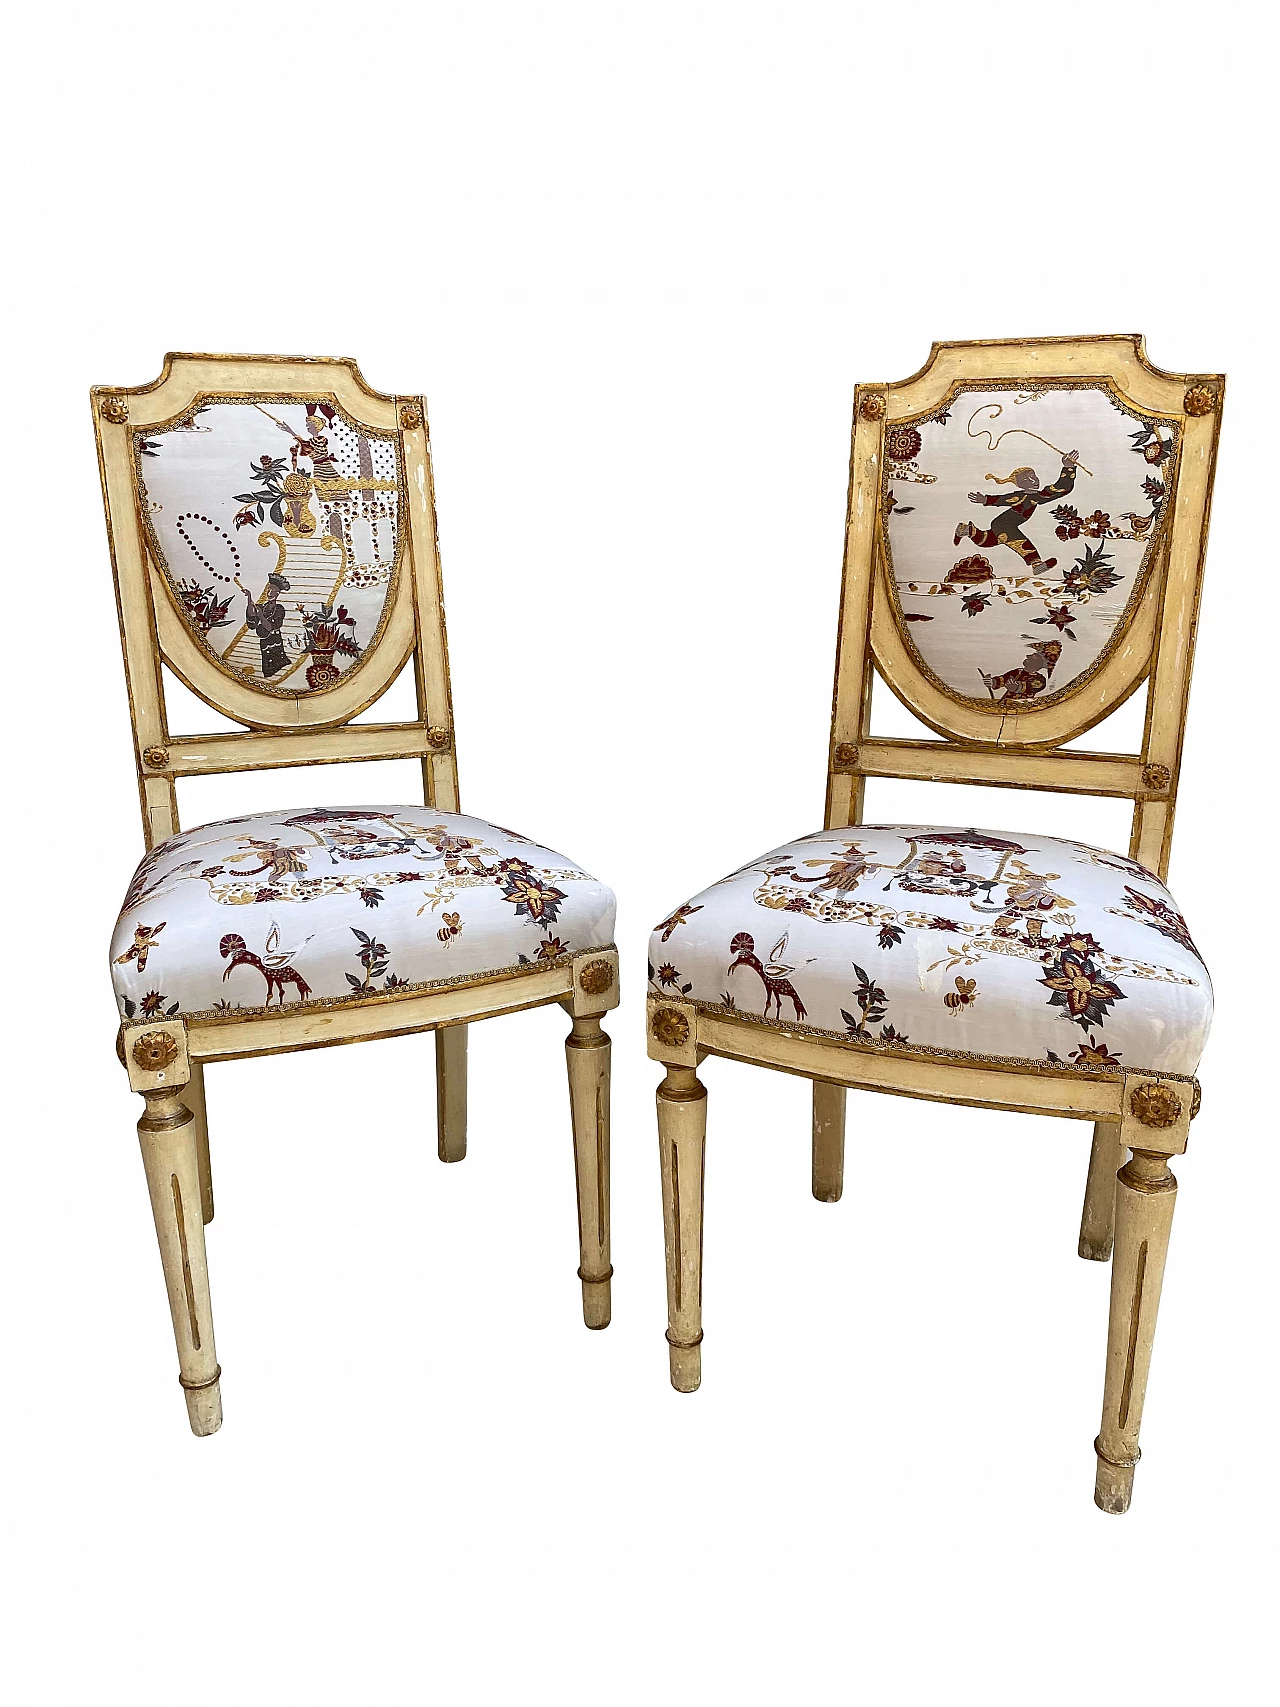 8 Lucca chairs with chinoiserie fabric, 18th century 1255947